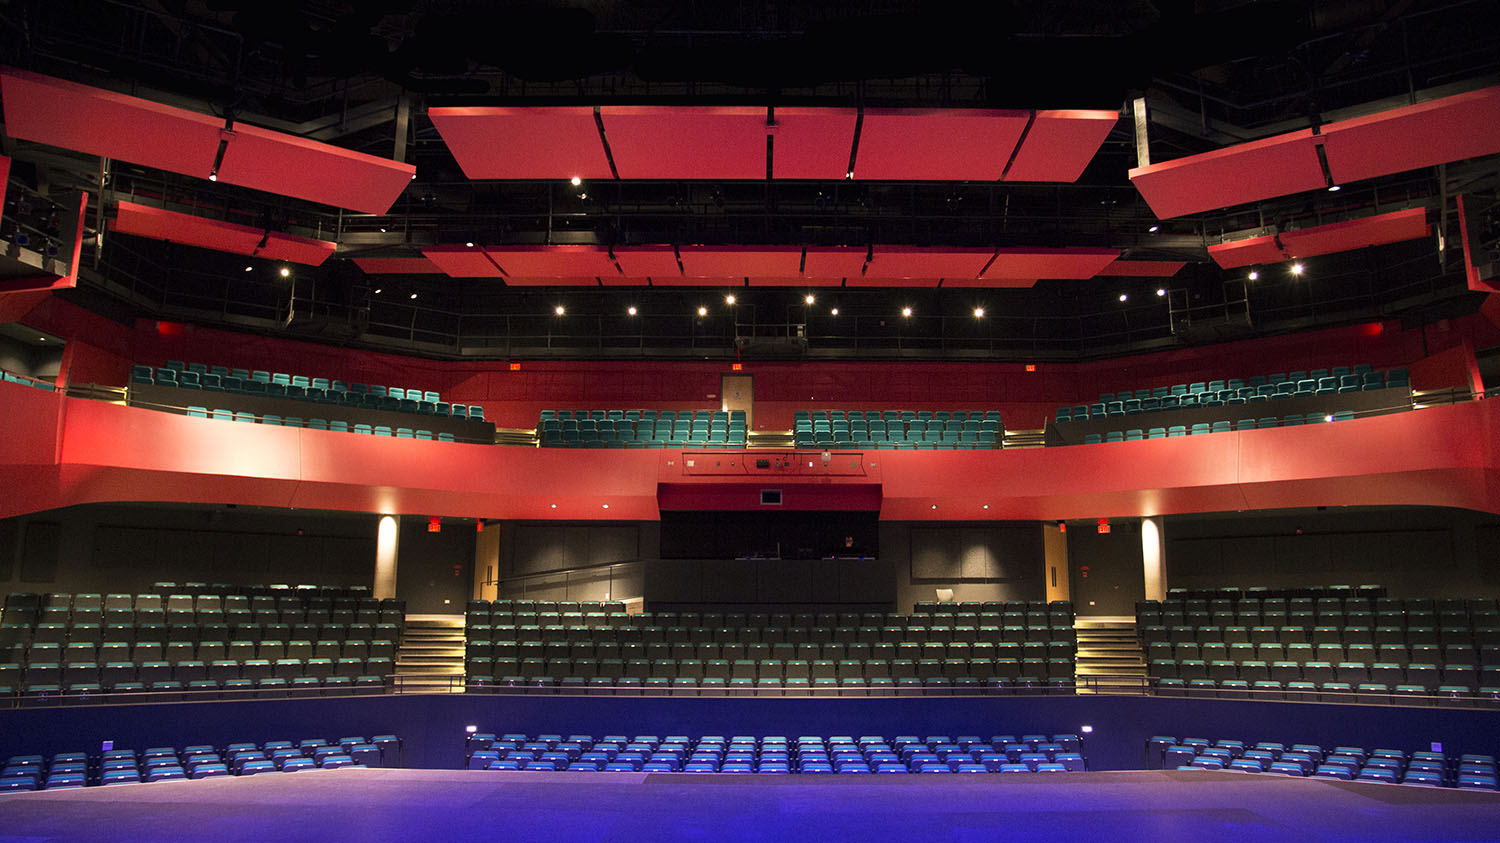 The view from centre-stage of the Algonquin Commons Theatre, facing towards the three audience level